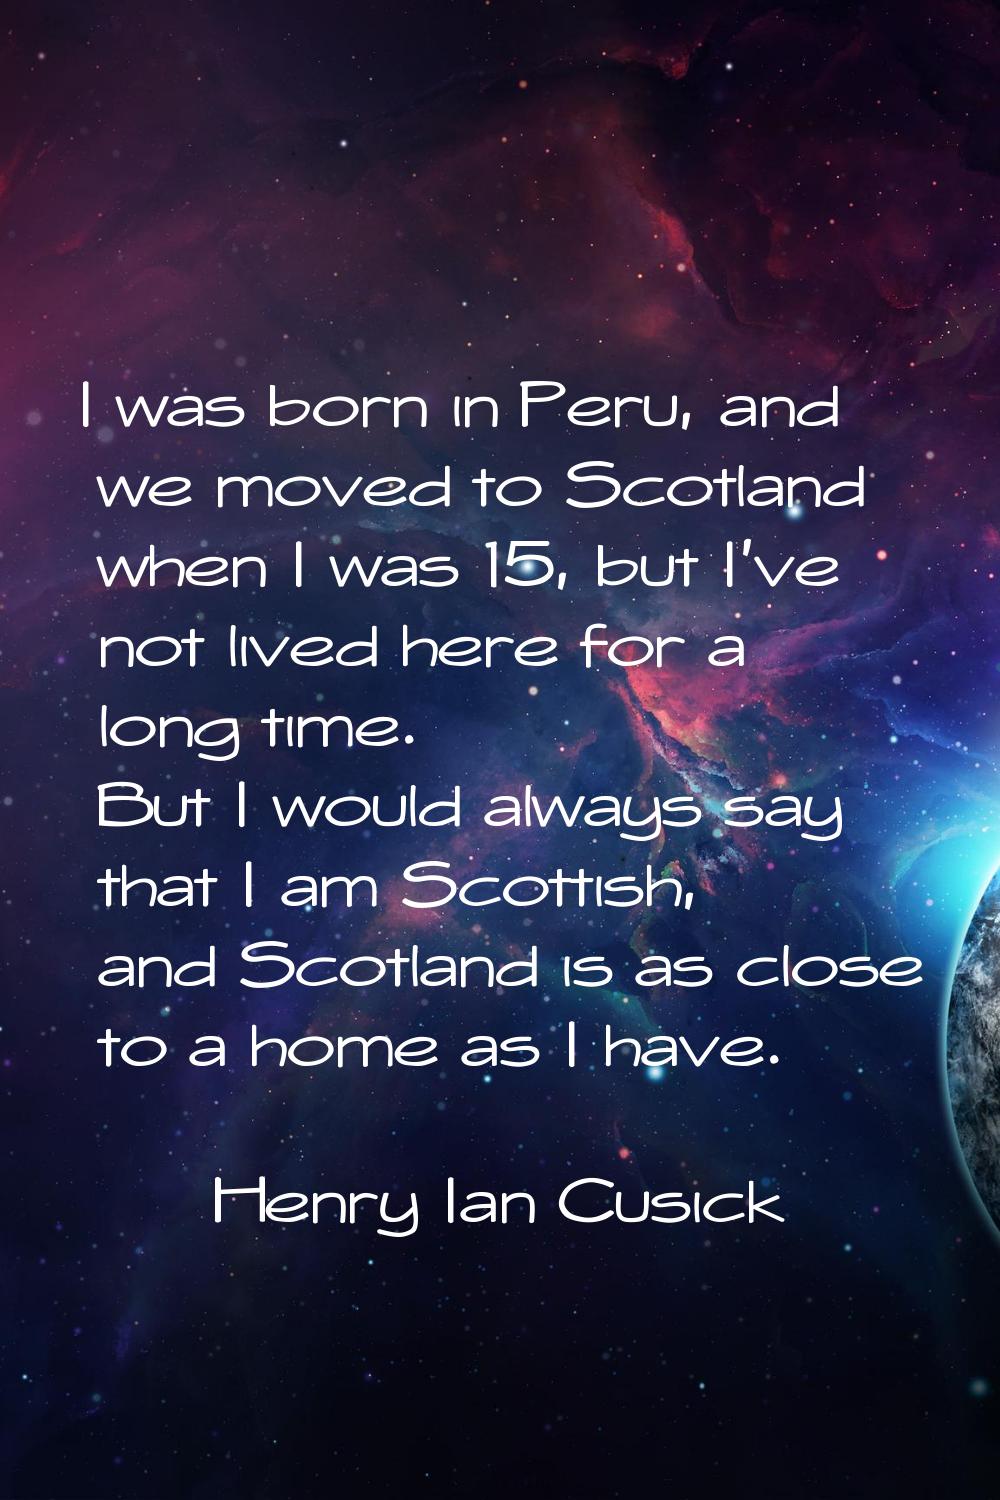 I was born in Peru, and we moved to Scotland when I was 15, but I've not lived here for a long time